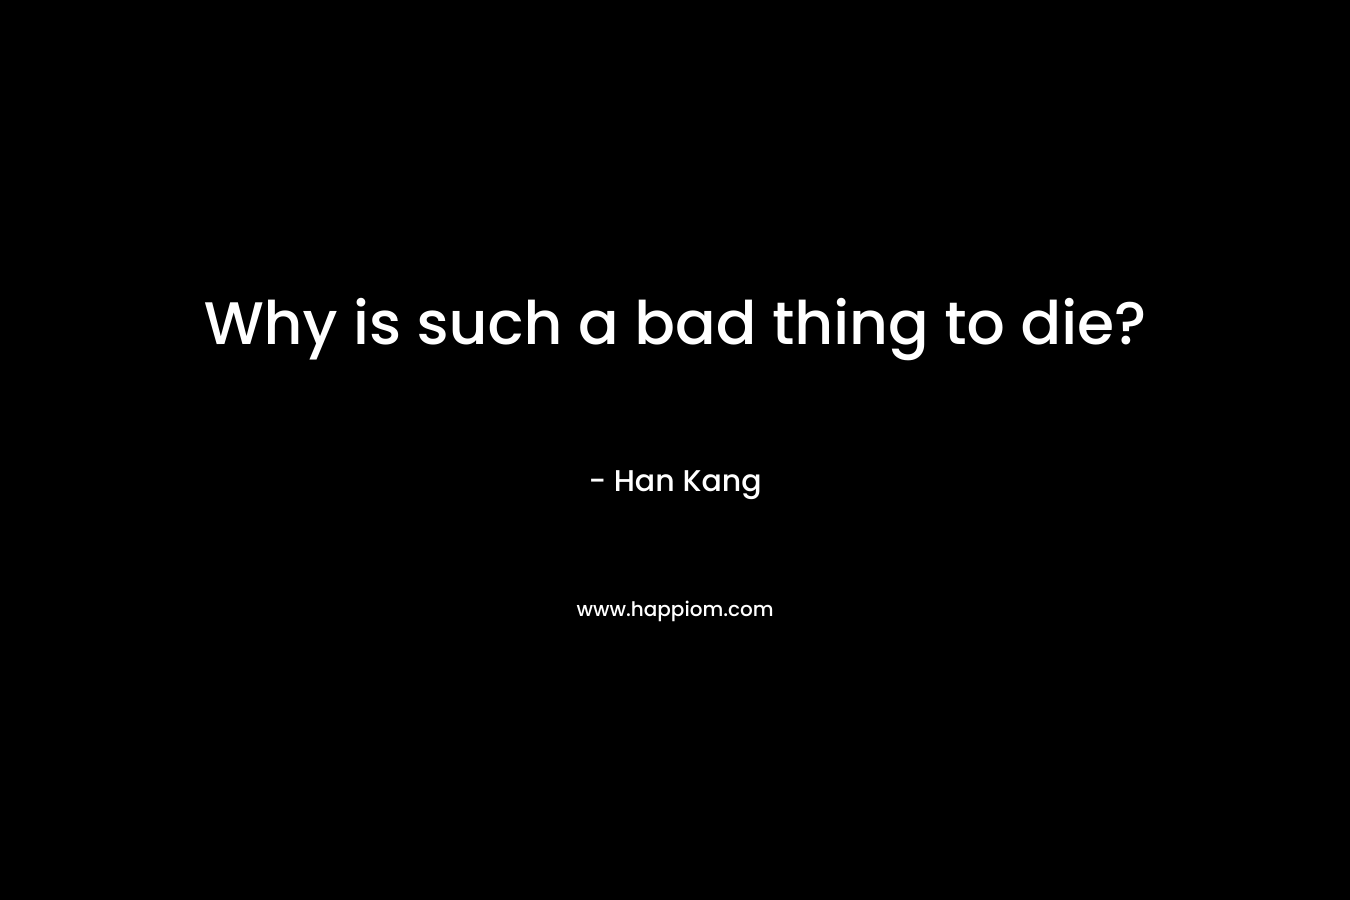 Why is such a bad thing to die?